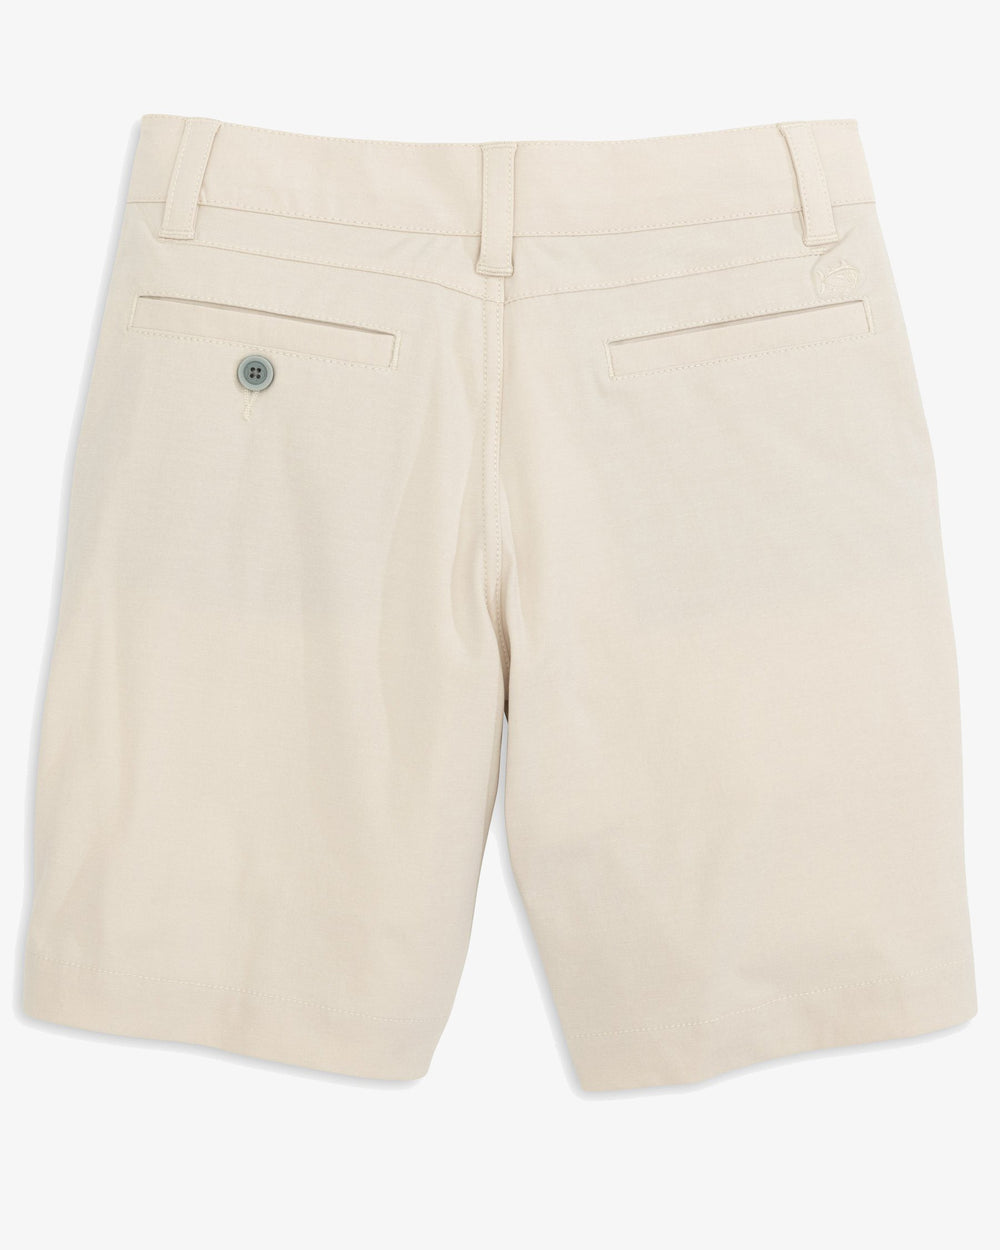 The back view of the Kid's T3 Gulf Short by Southern Tide - Stone